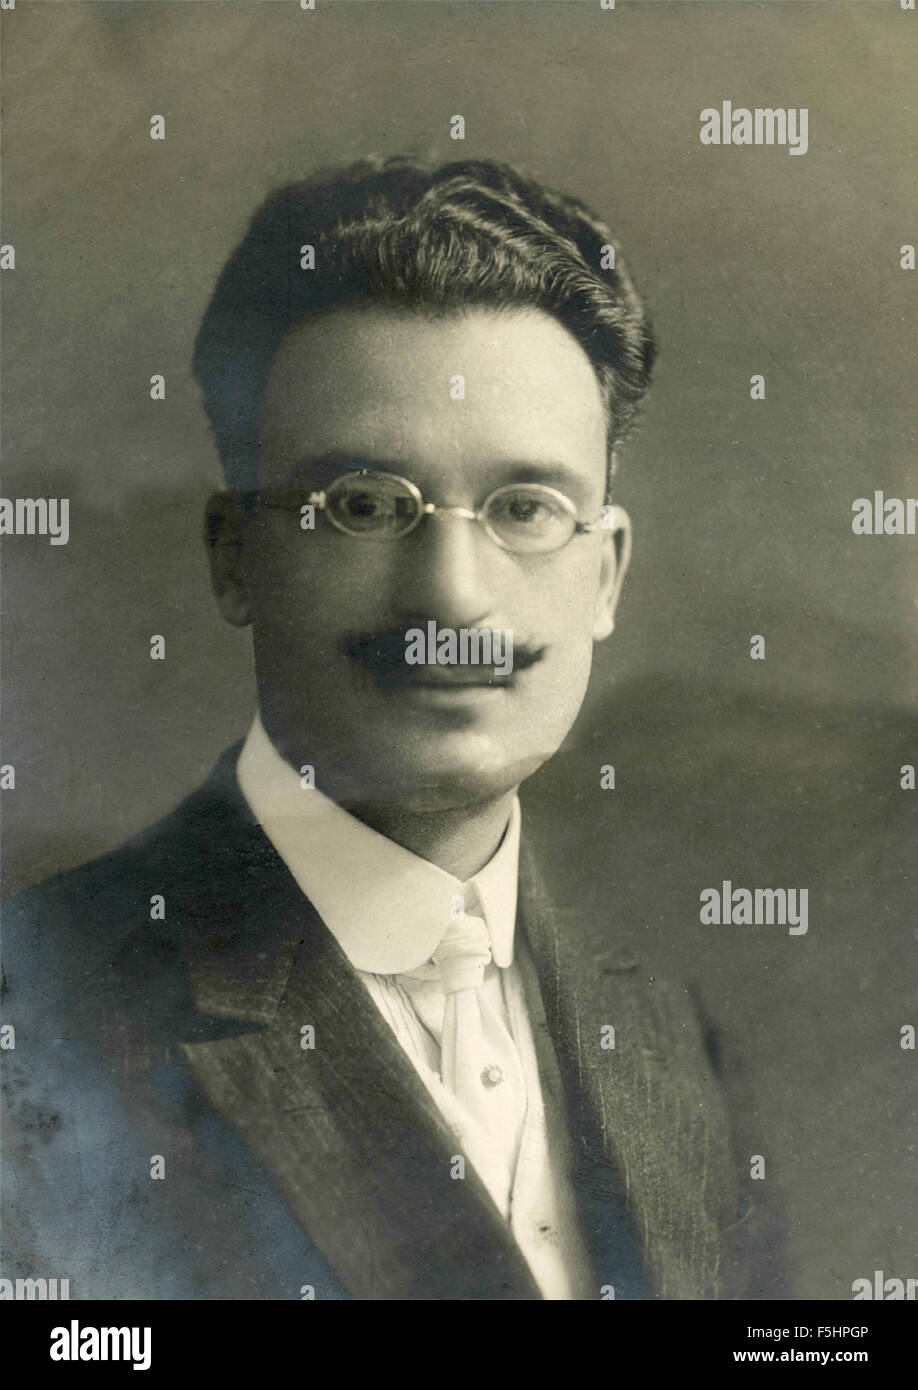 Portrait of a man with glasses, Italy Stock Photo